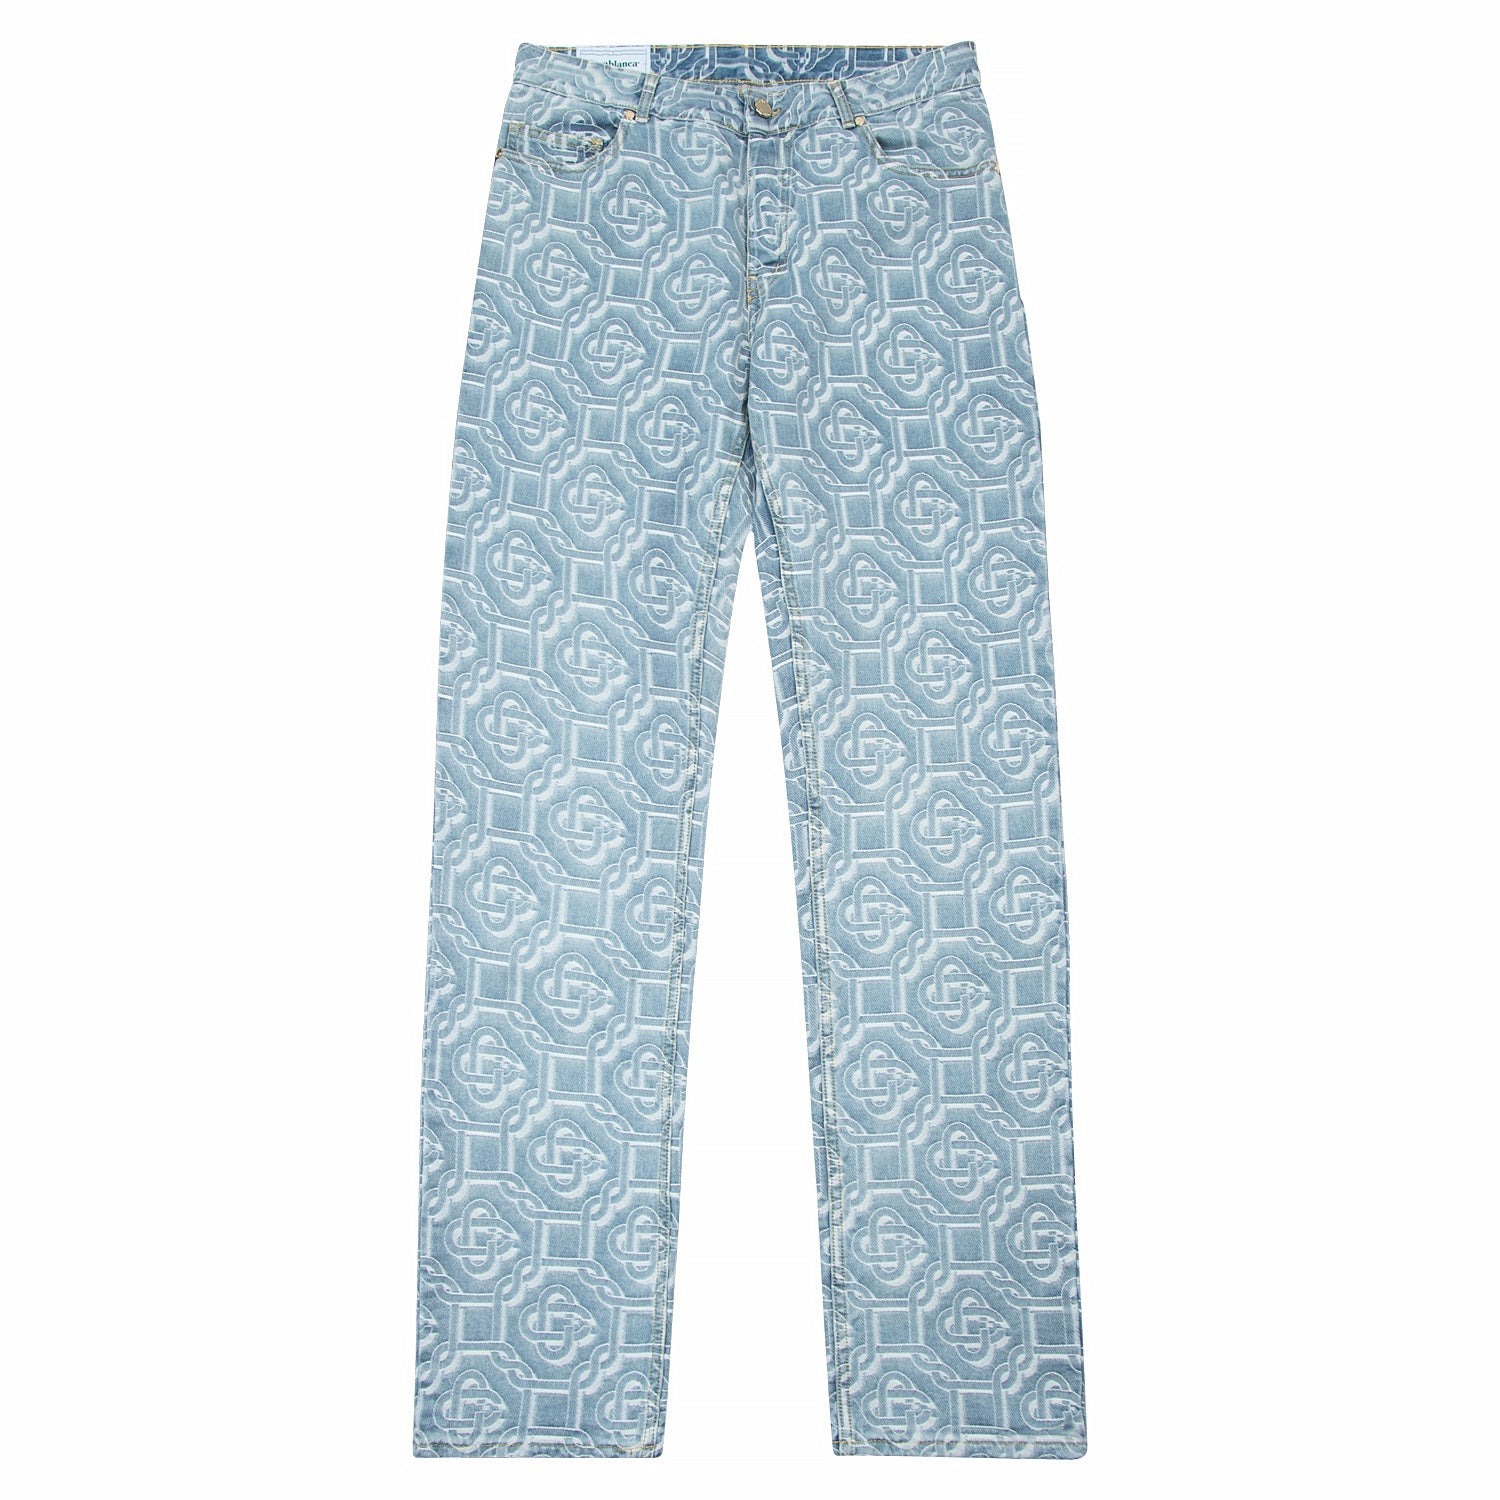 Dauphine size contrast, faded jacquard denim with Monogram pattern